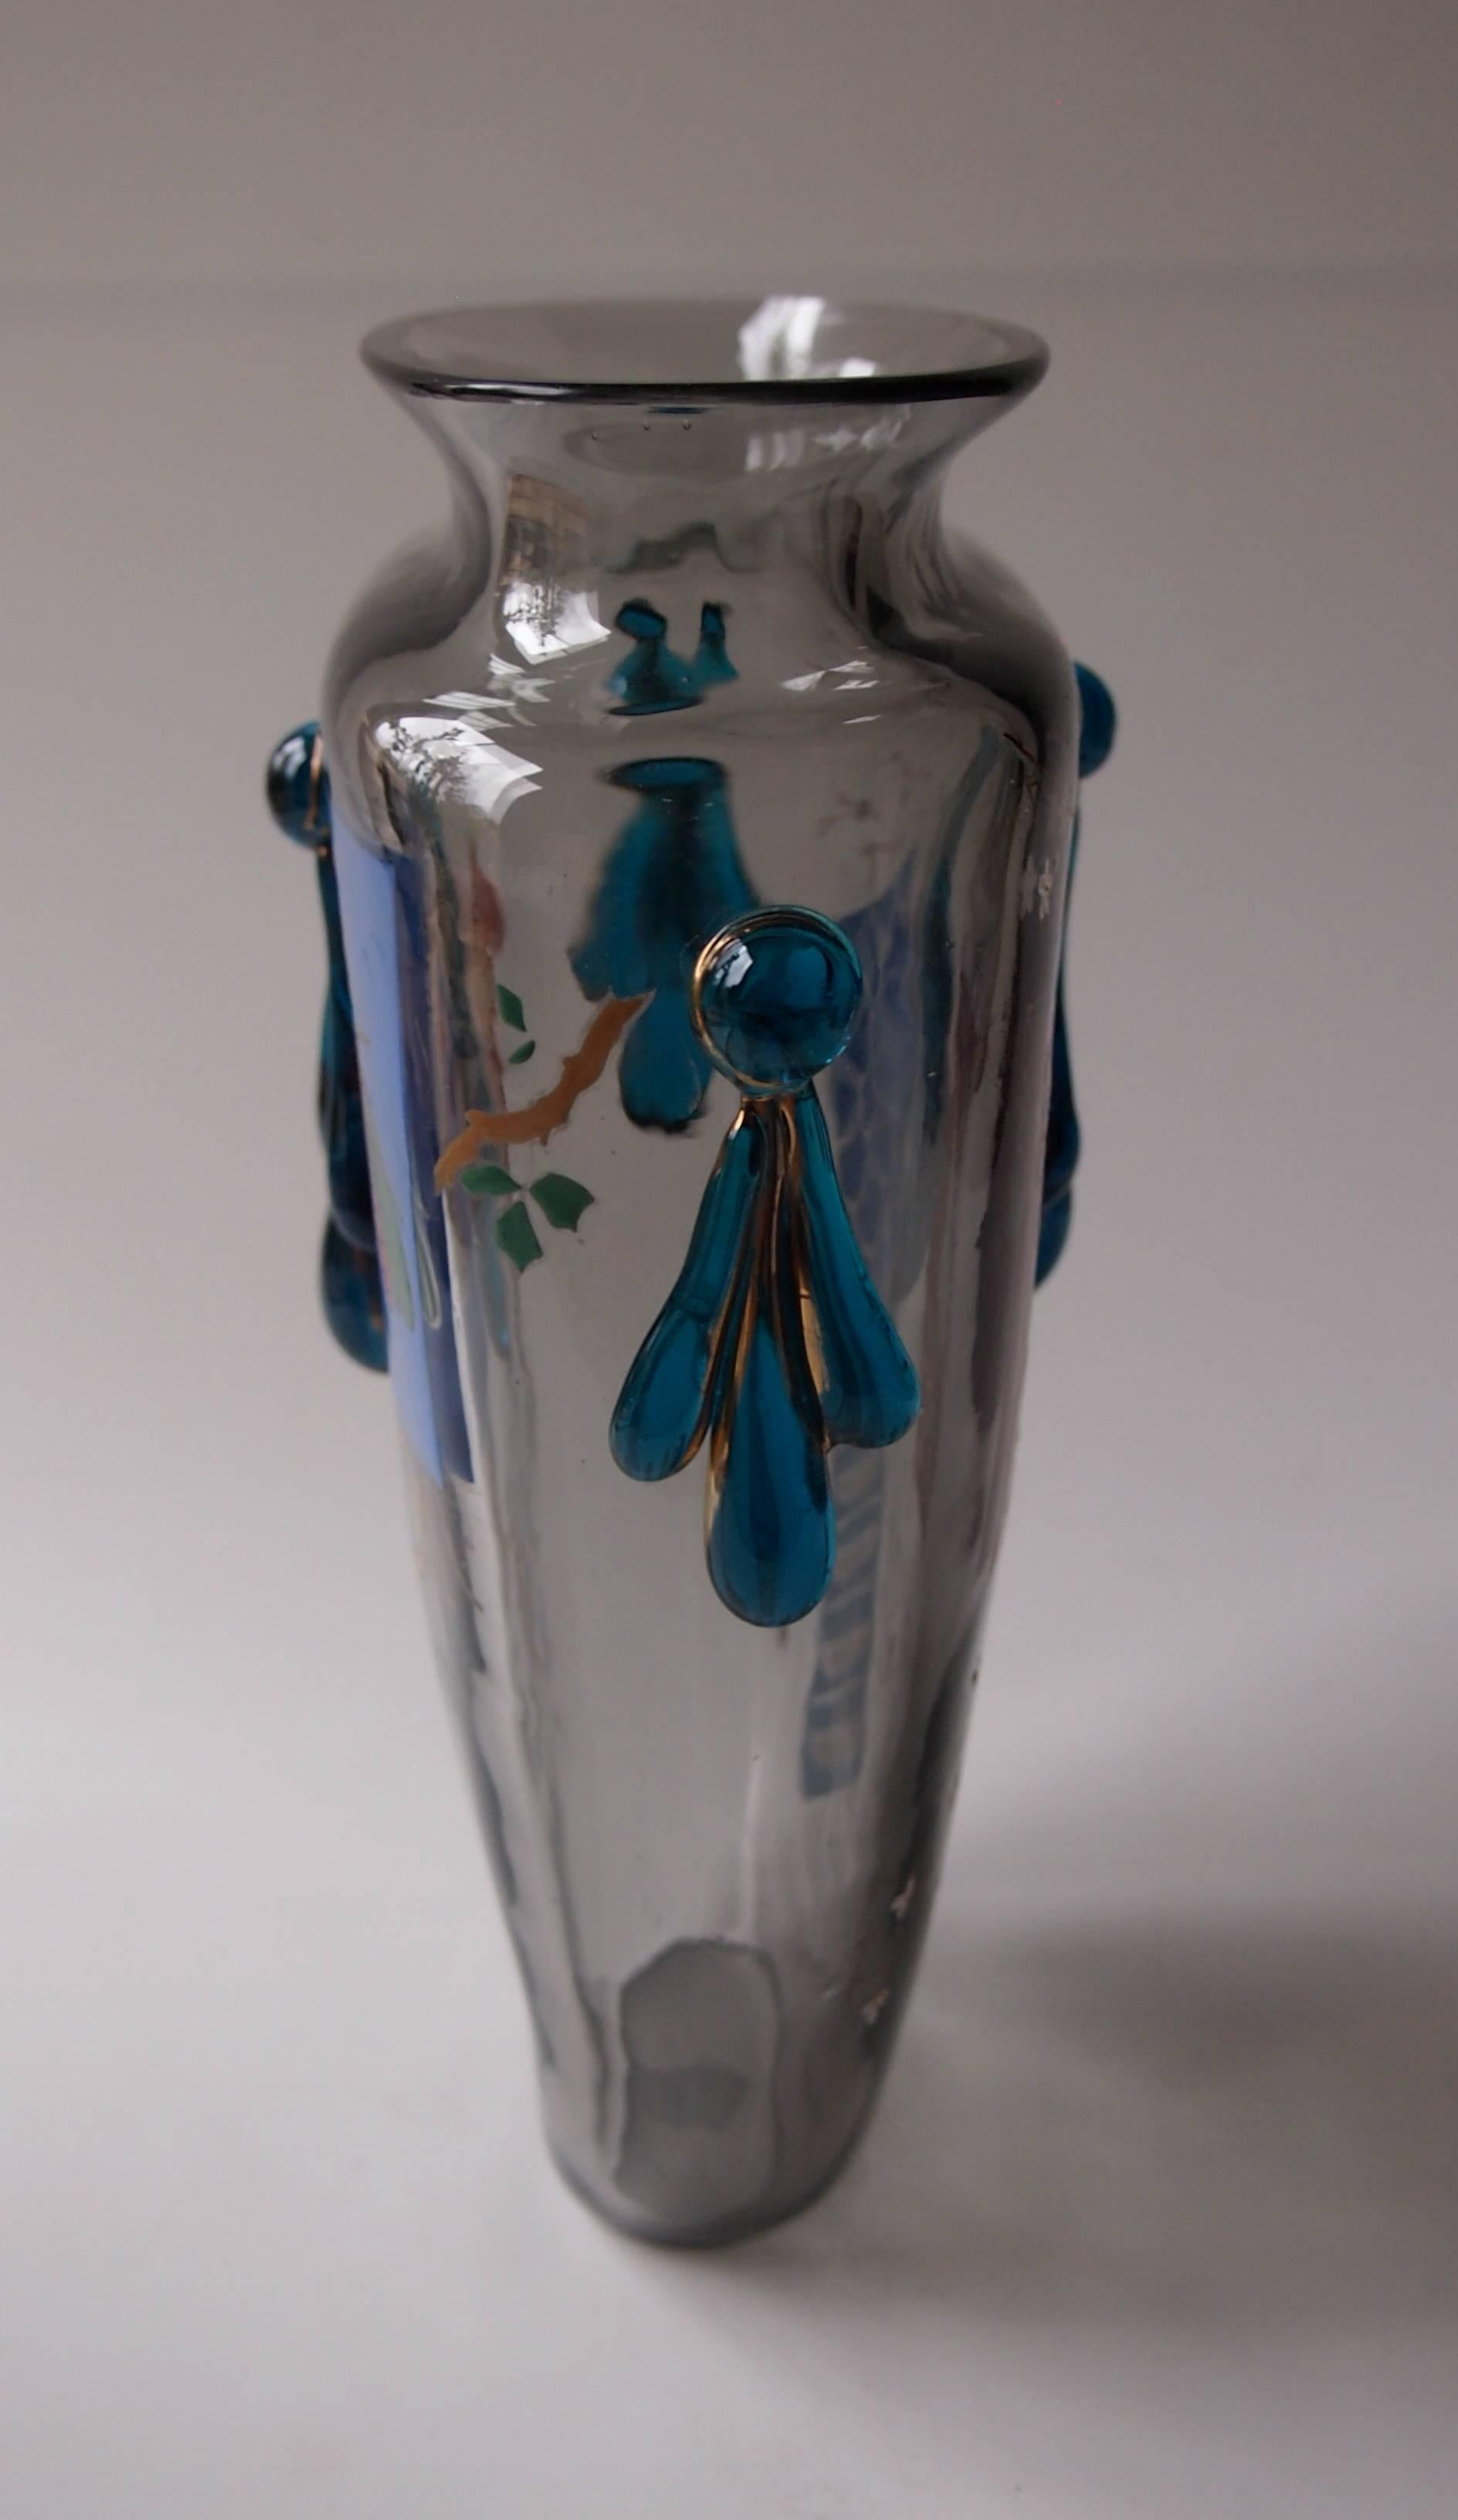 Stunning grey flattened form vase by Harrach in the Japonisme style decorated with enamel cartouches depicting insects and other oriental design imagery. With hot applied blue gilded swag decorations

Harrach has been the backbone of Bohemian, and